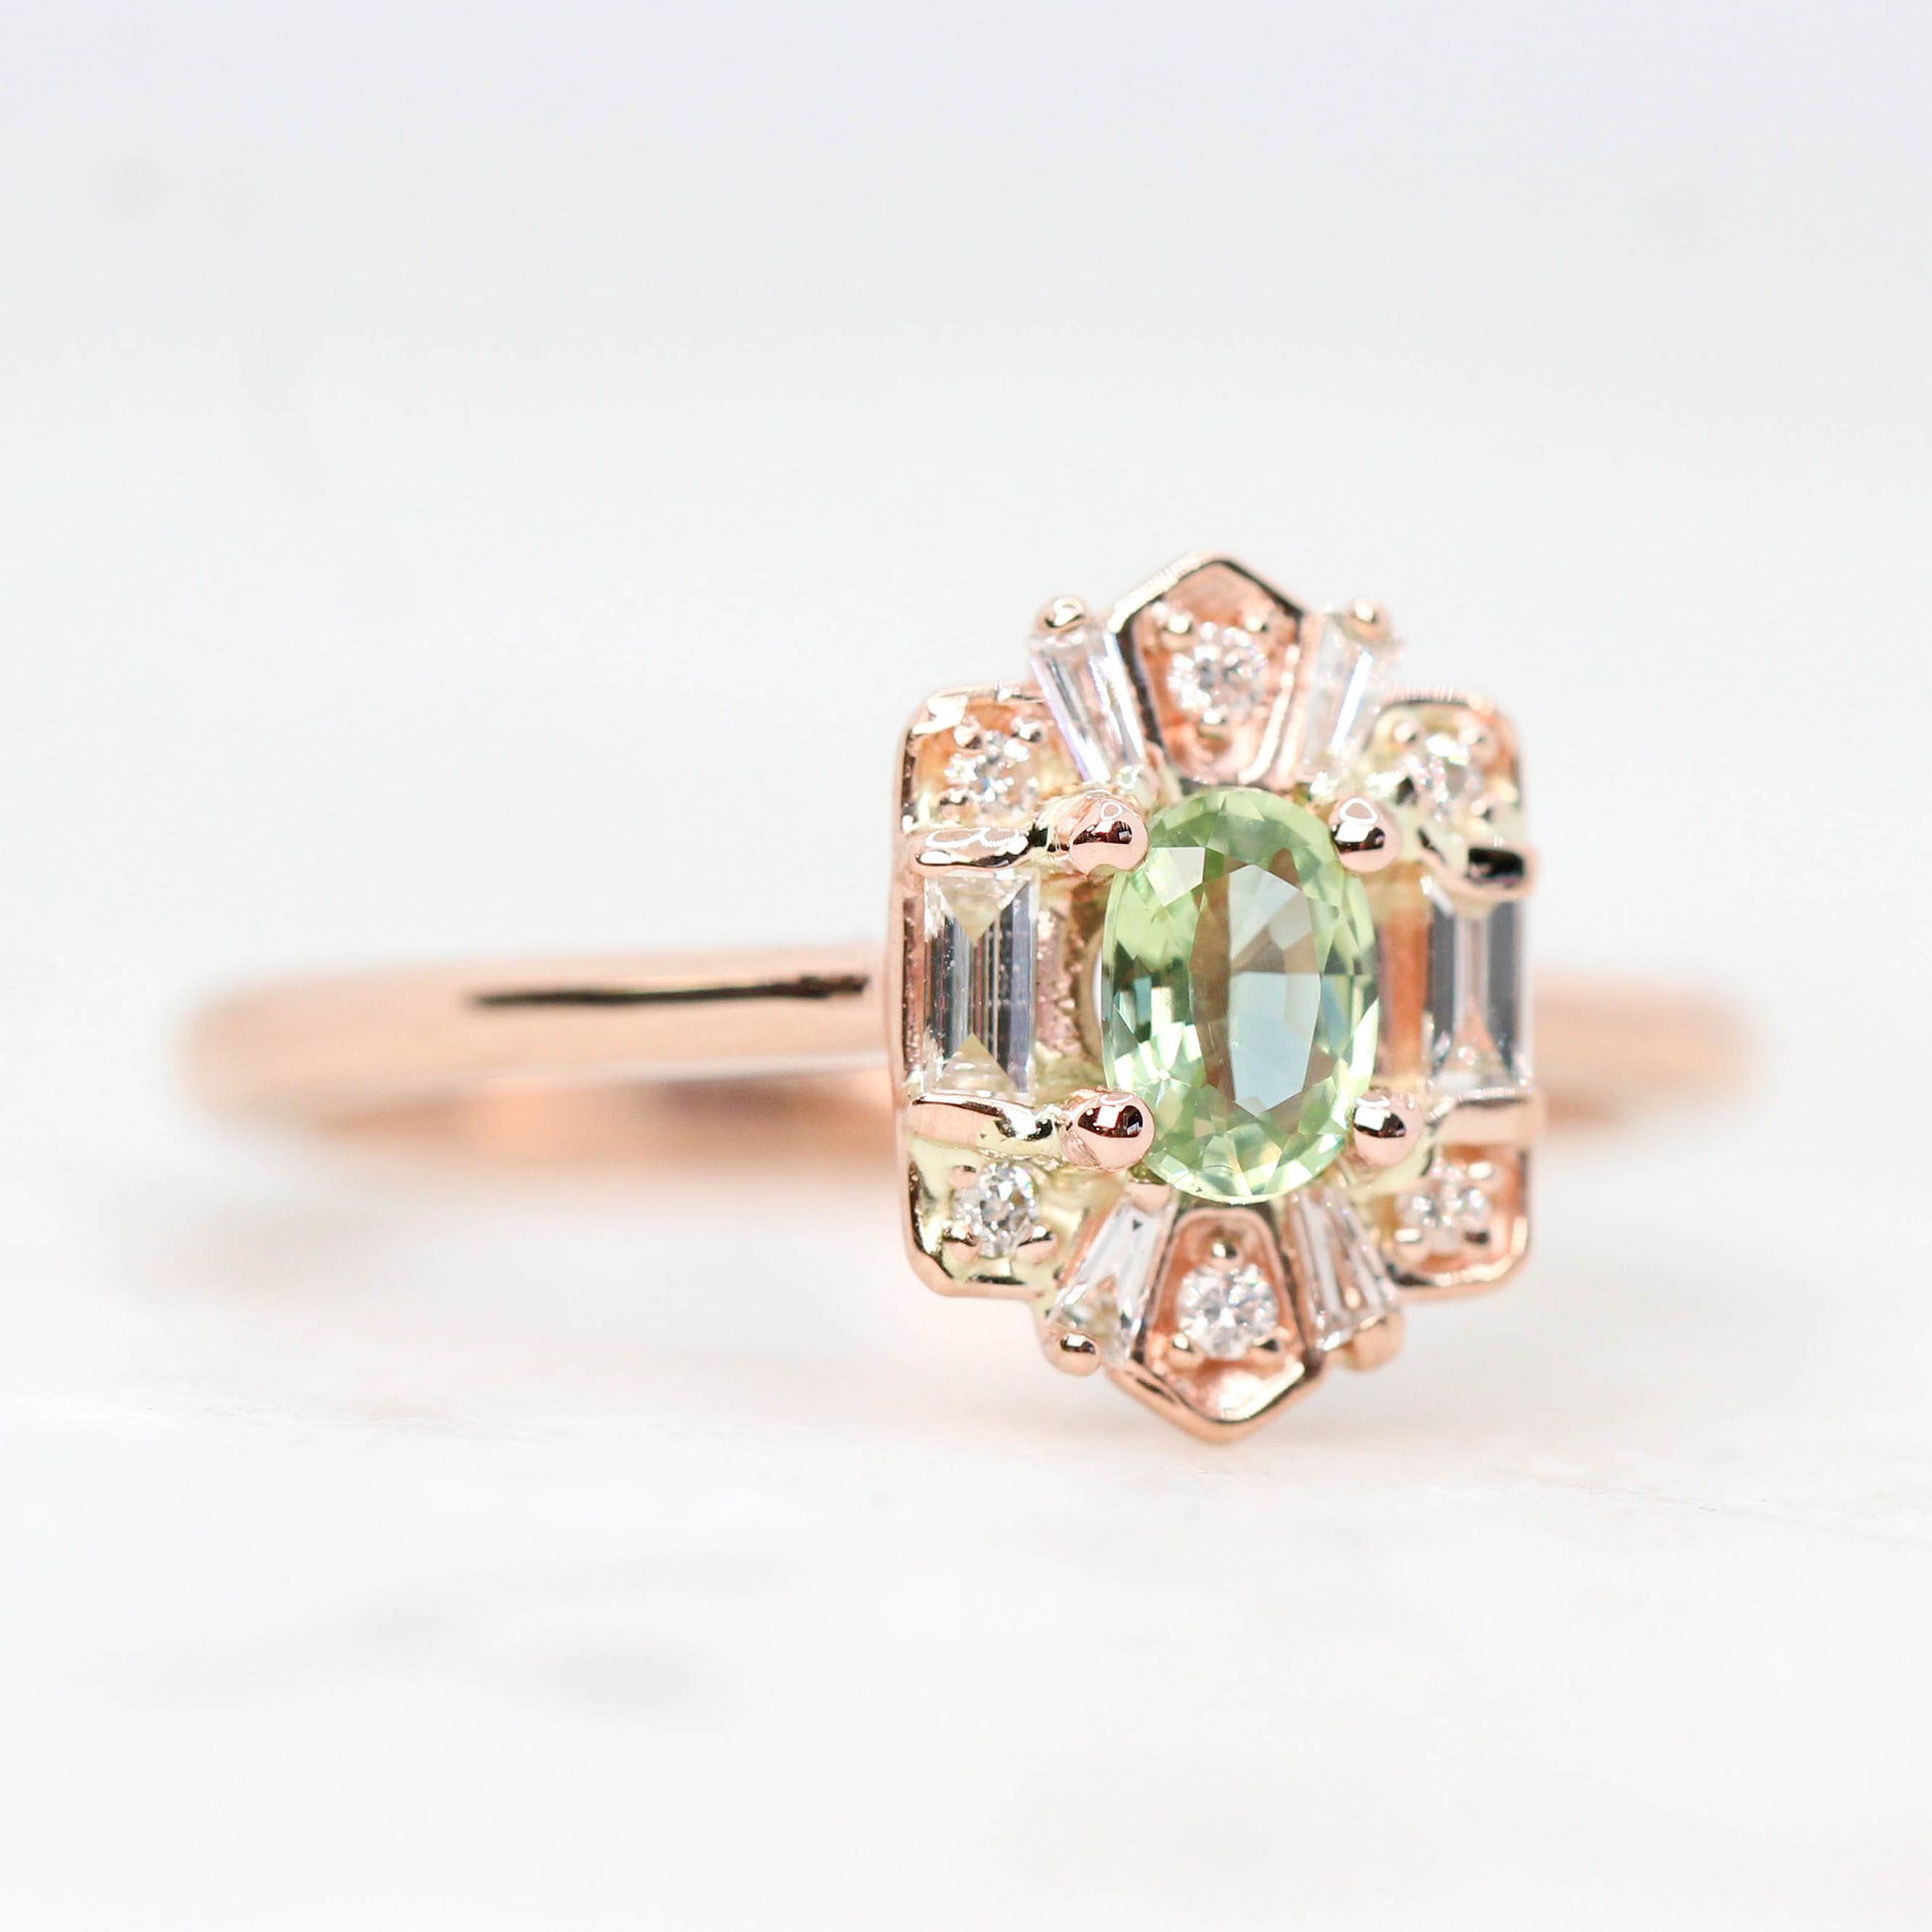 Geraldine Ring with a 0.62 Carat Light Green Oval Australian Sapphire and White Accent Diamonds in 10k Rose Gold - Ready to Size and Ship - Midwinter Co. Alternative Bridal Rings and Modern Fine Jewelry